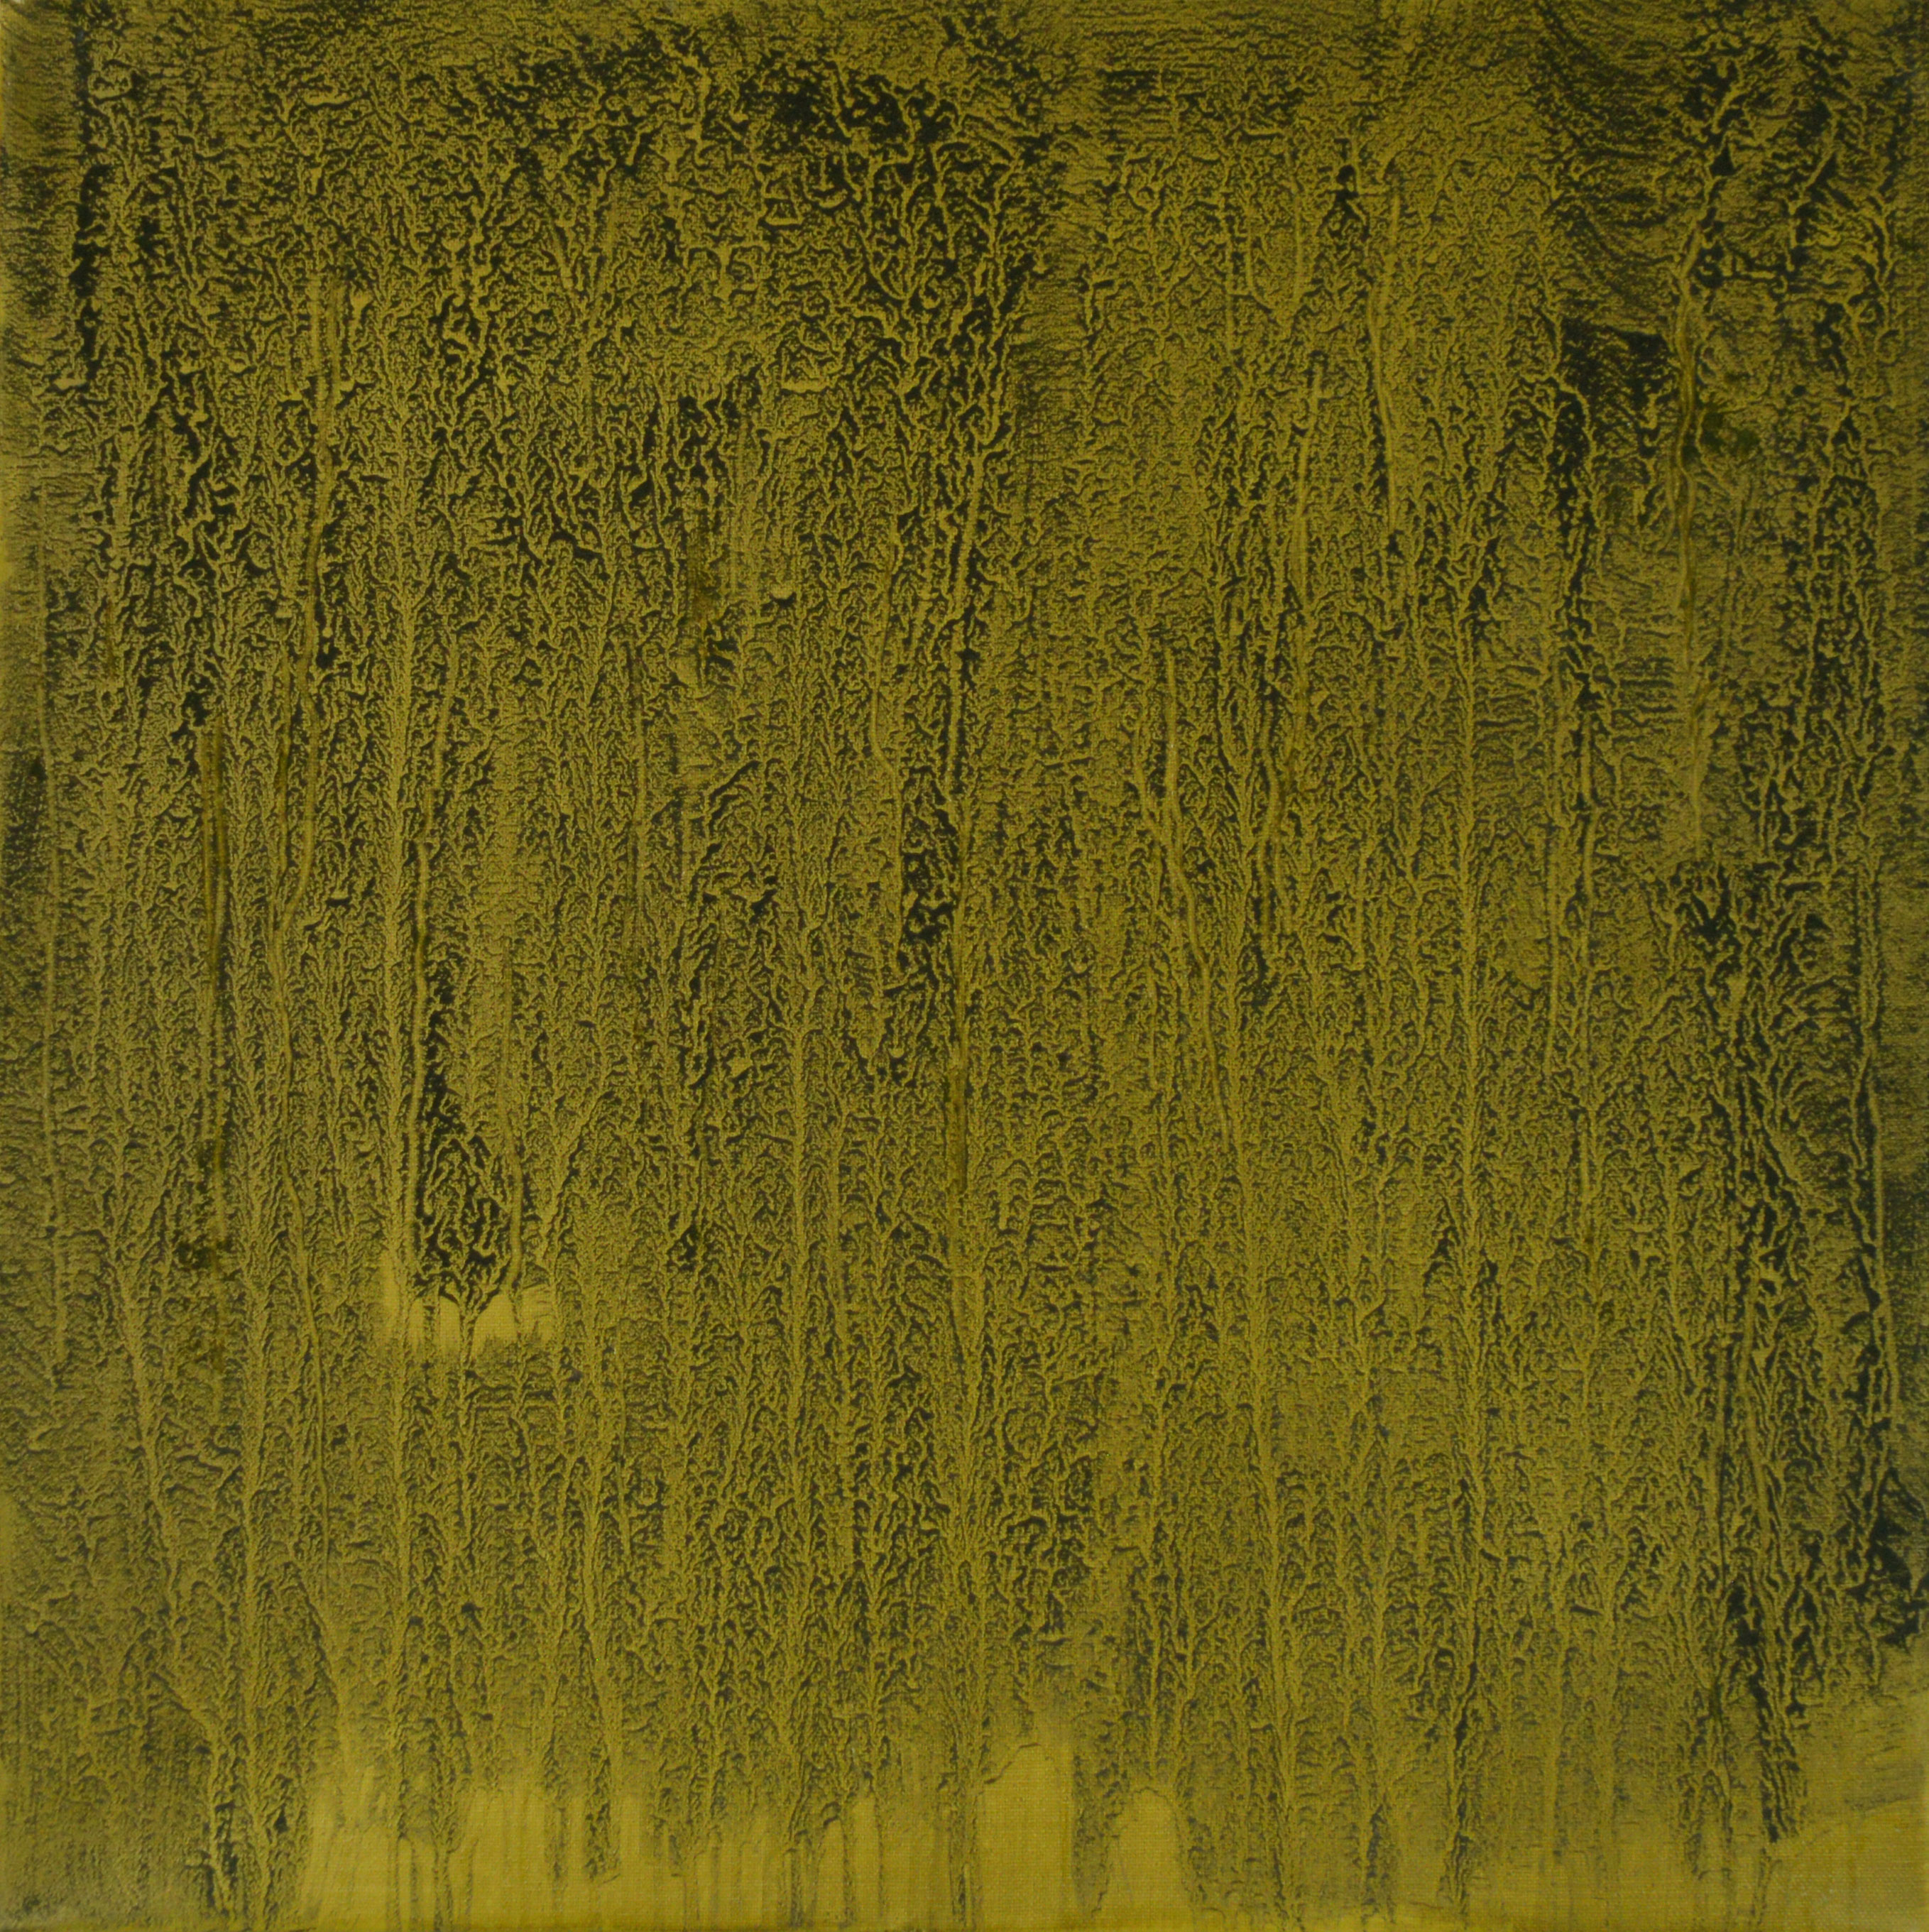 Án titils | Untitled 2015. Mineral powder from the lava Kapelliharun, Olive green and oil on canvas, 60 x 60 cm. 